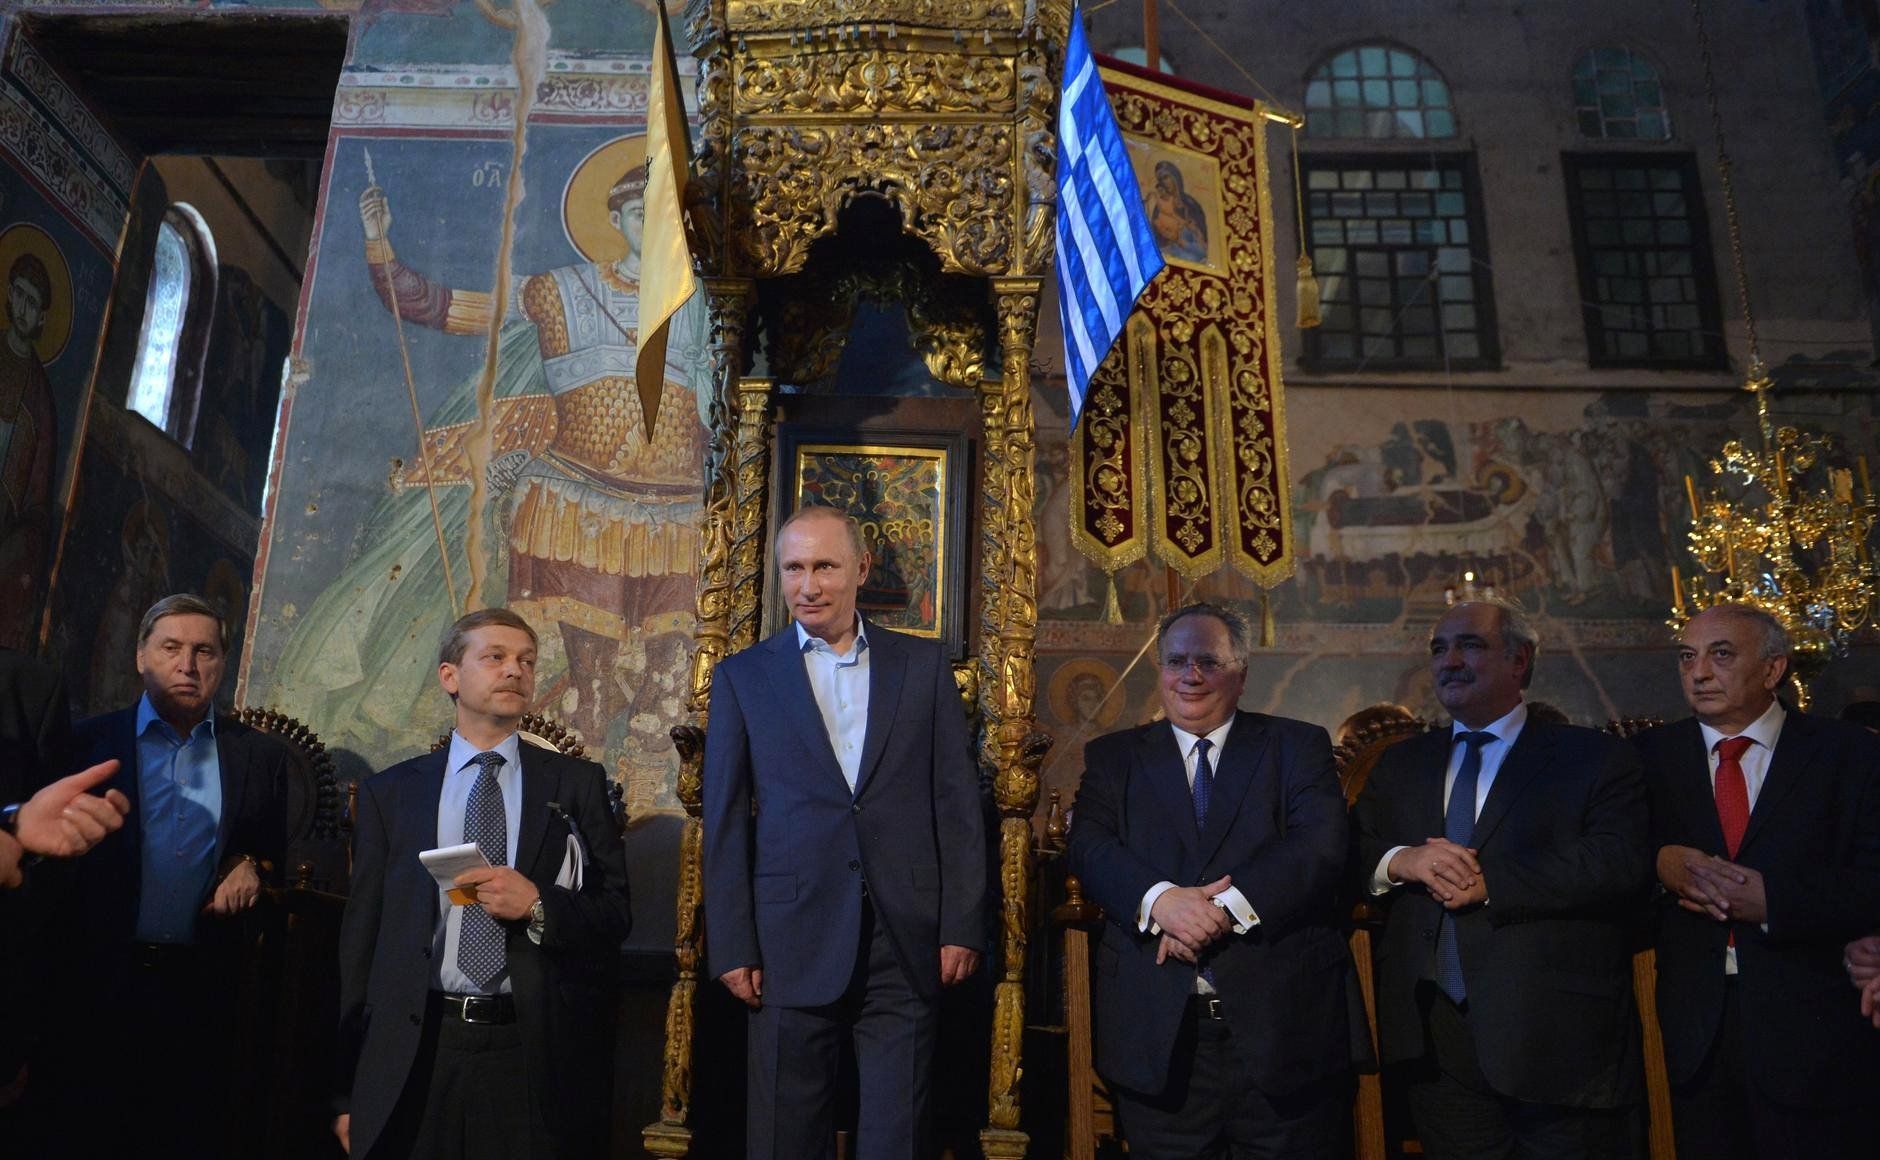 Vladimir Putin visiting Karyes, the Orthodox enclave of Mount Athos. The above photo, of Putin standing at an ancient throne alongside Greek officials and Orthodox dignitaries, was described by various Russian news outlets, both within the country and abroad, as Putin standing at a place which had until now been reserved only for Byzantine emperors. (Image: life.ru)